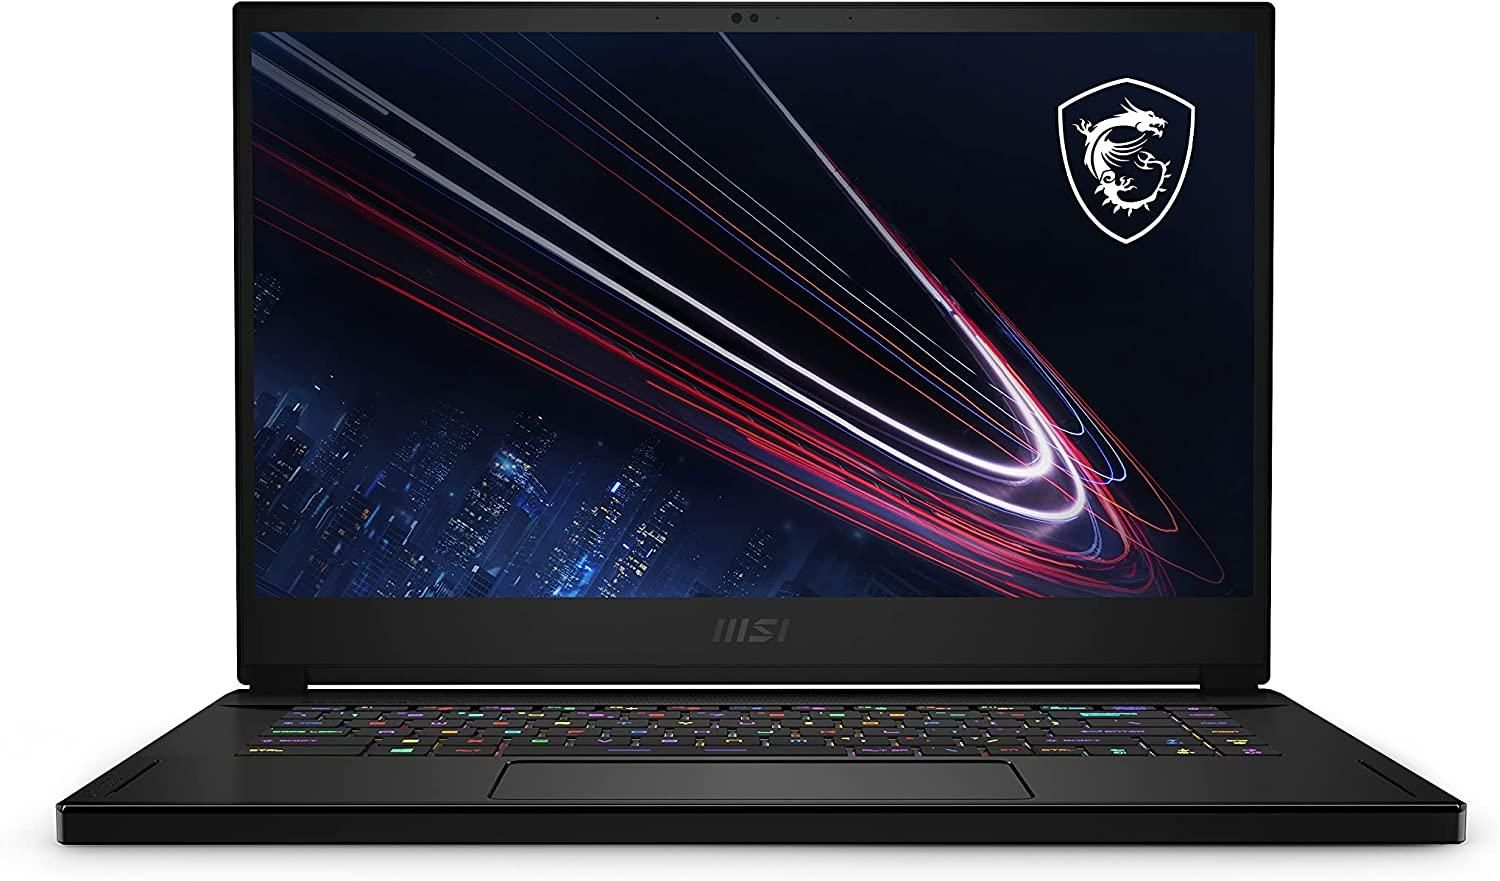 MSI GS66 Stealth 15.6-inch QHD Gaming Laptop product box image